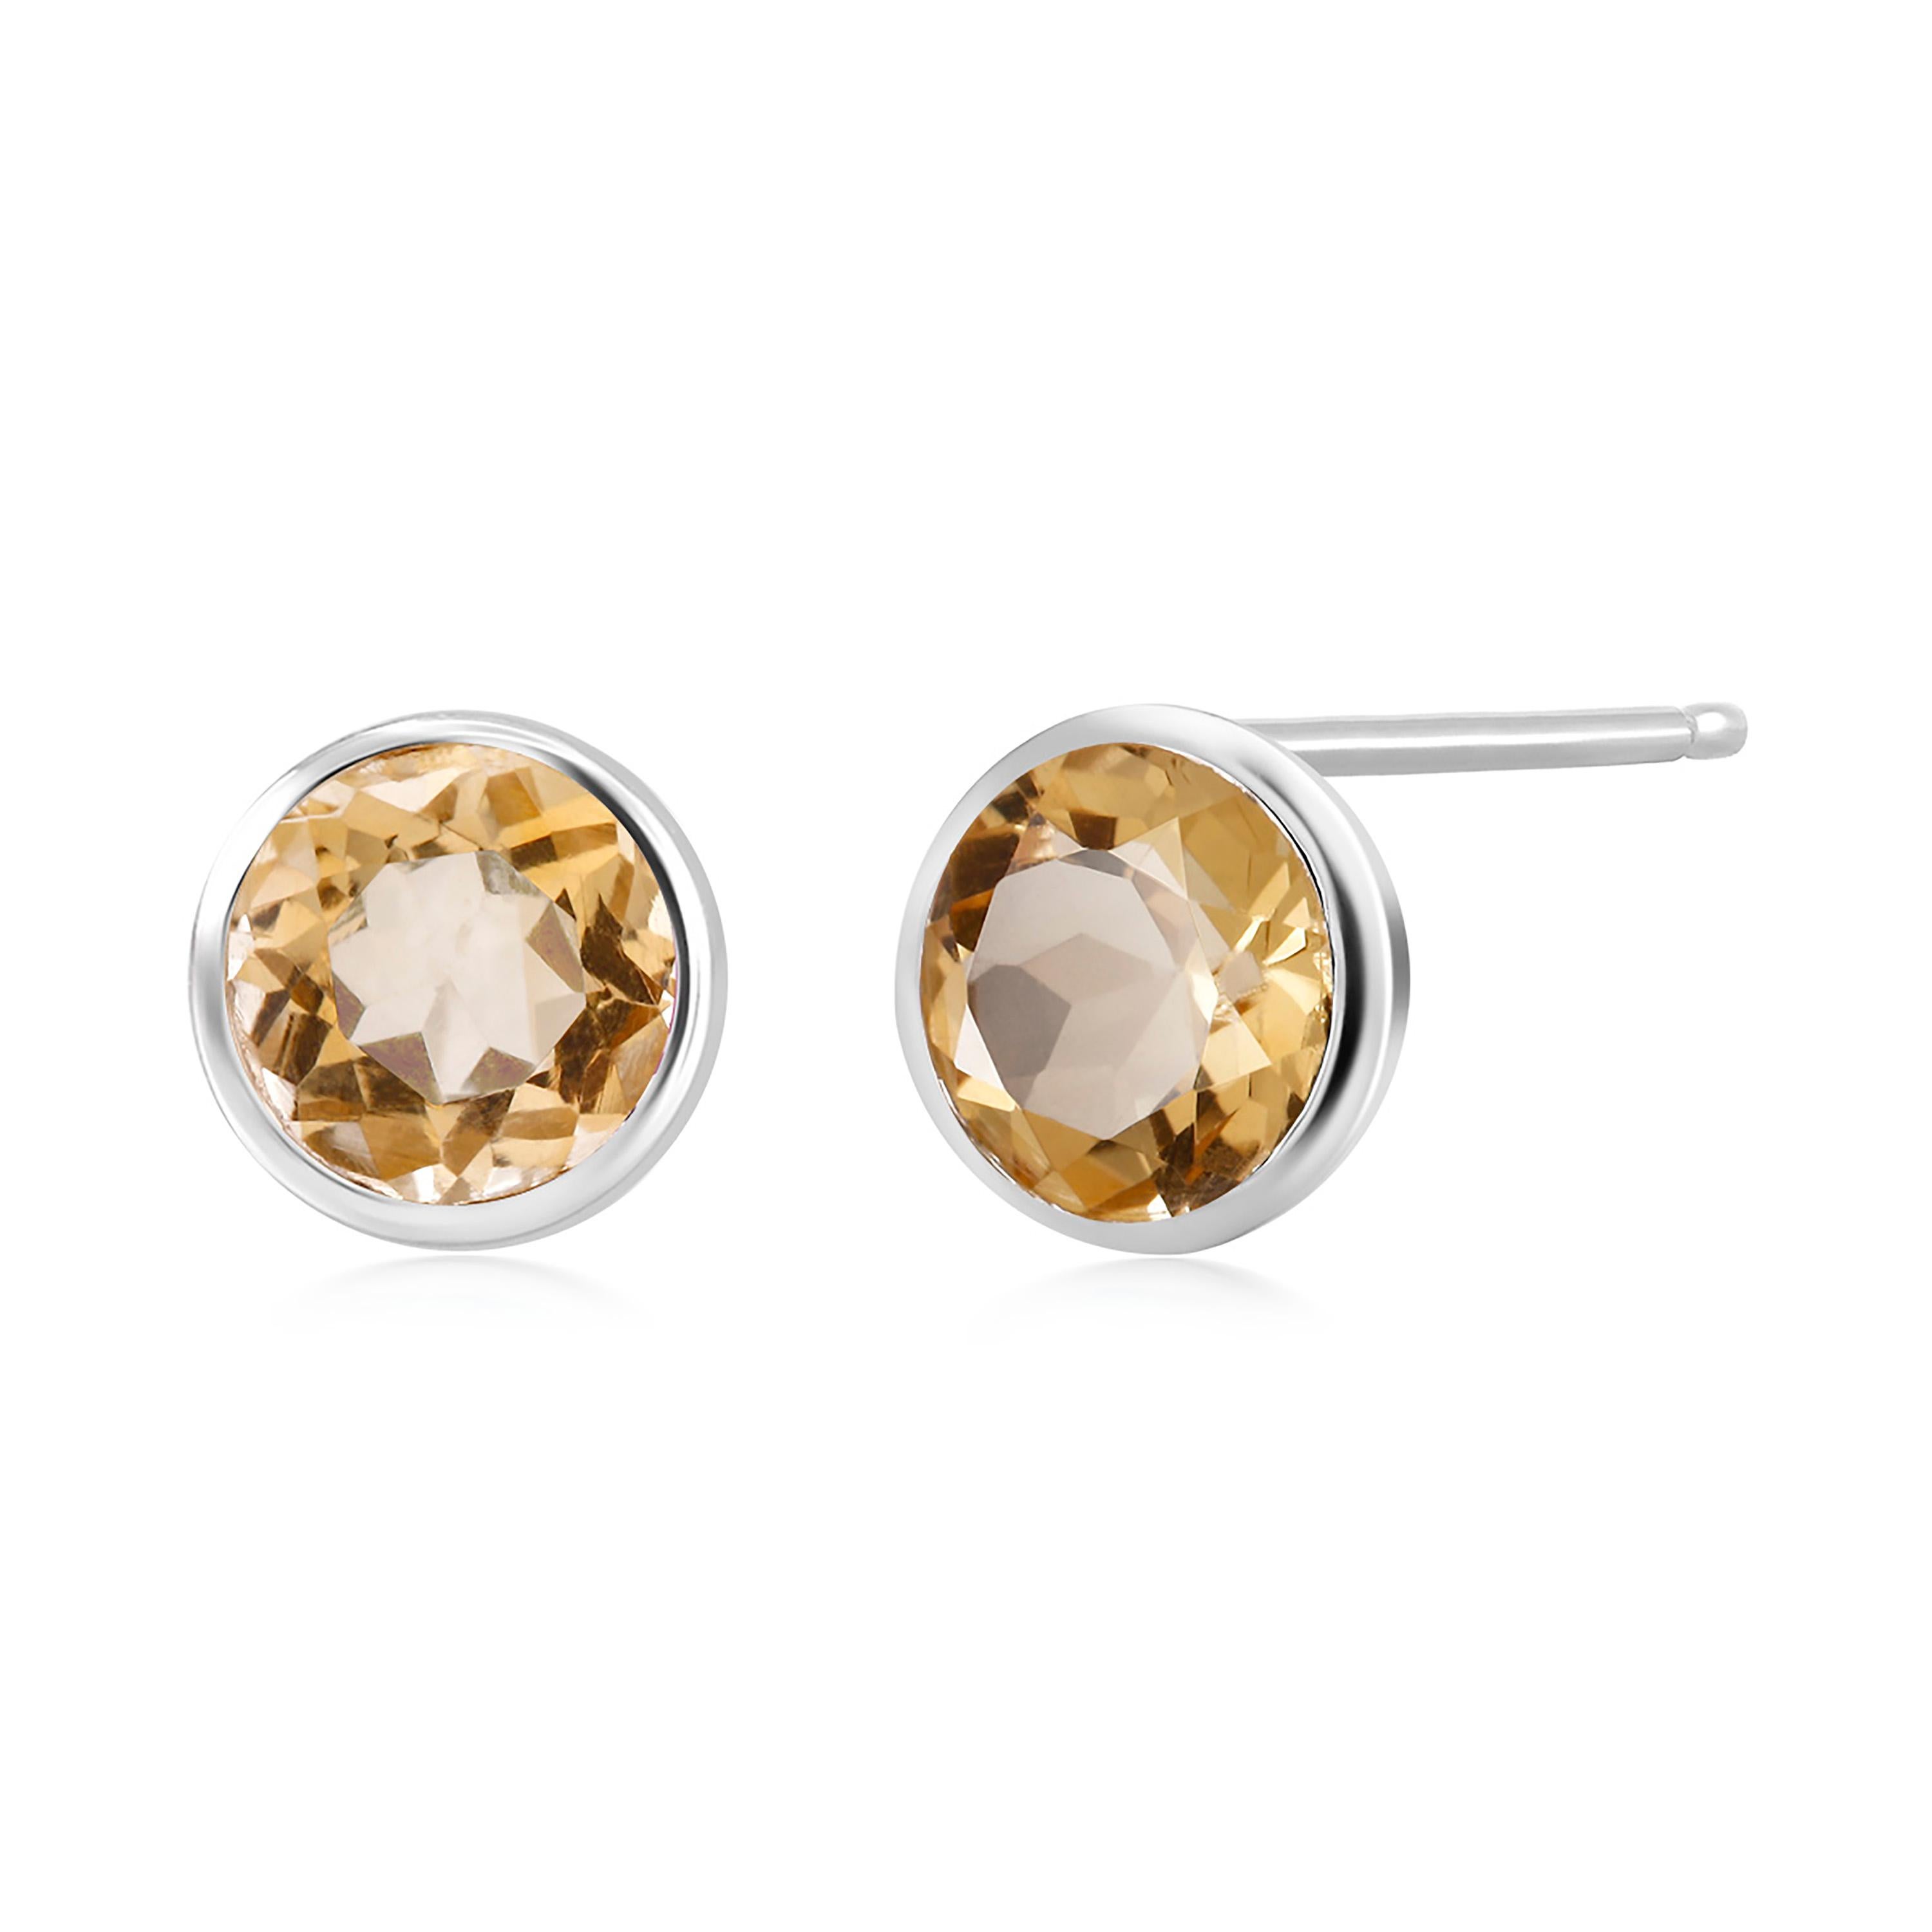 Round Cut Round Pair of Yellow Citrine Bezel Set Silver Stud Earrings Weighing 6 Carat